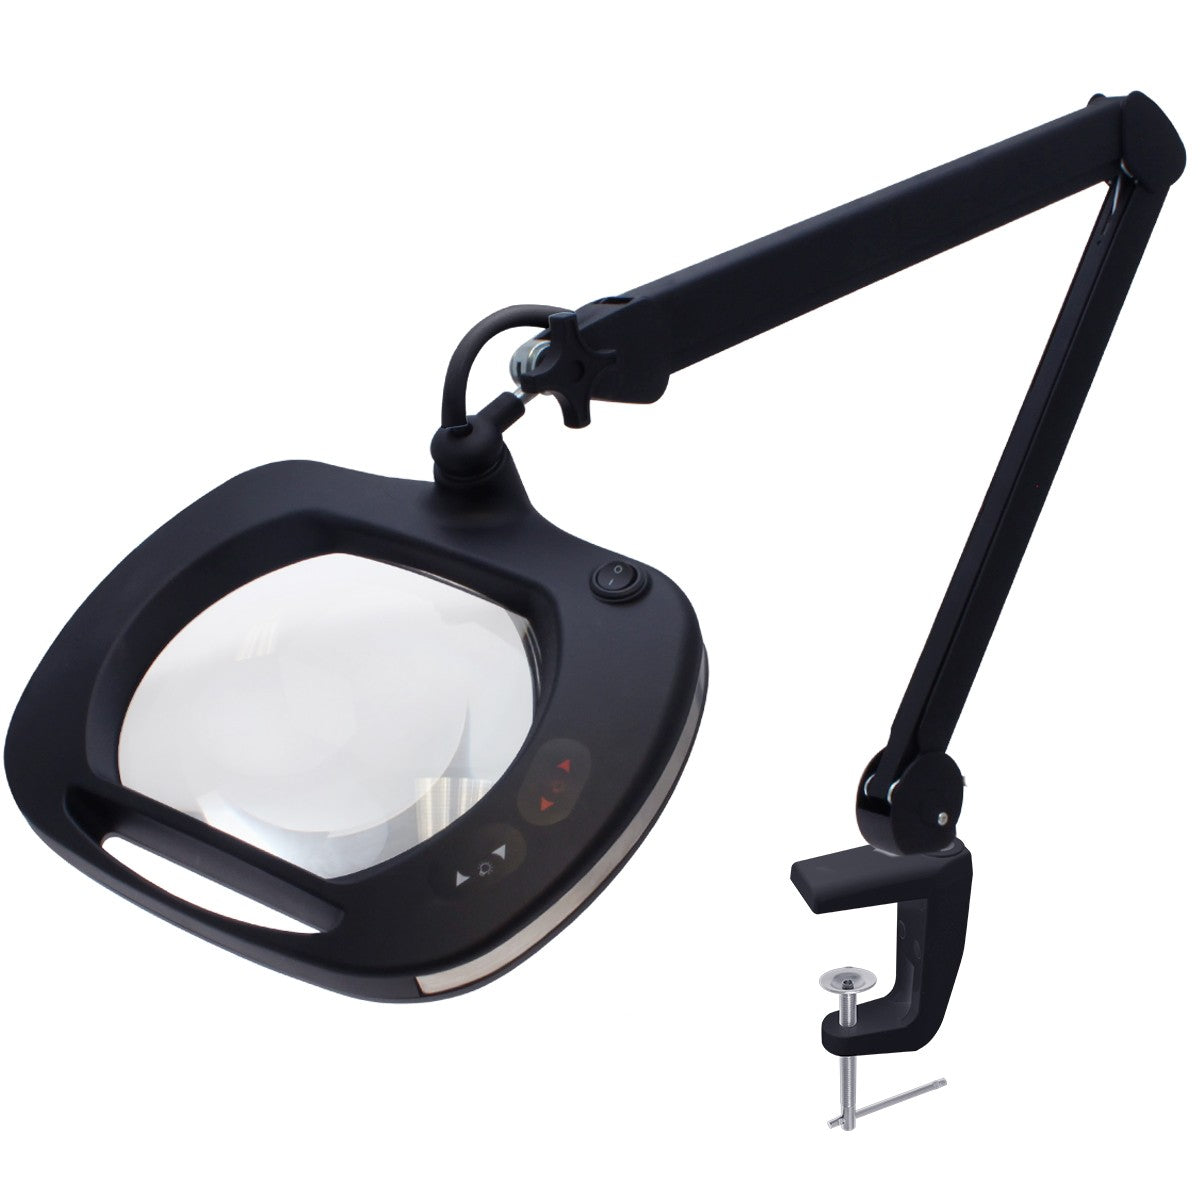 Fluorescent 5 Diopter Magnifying Lamp White